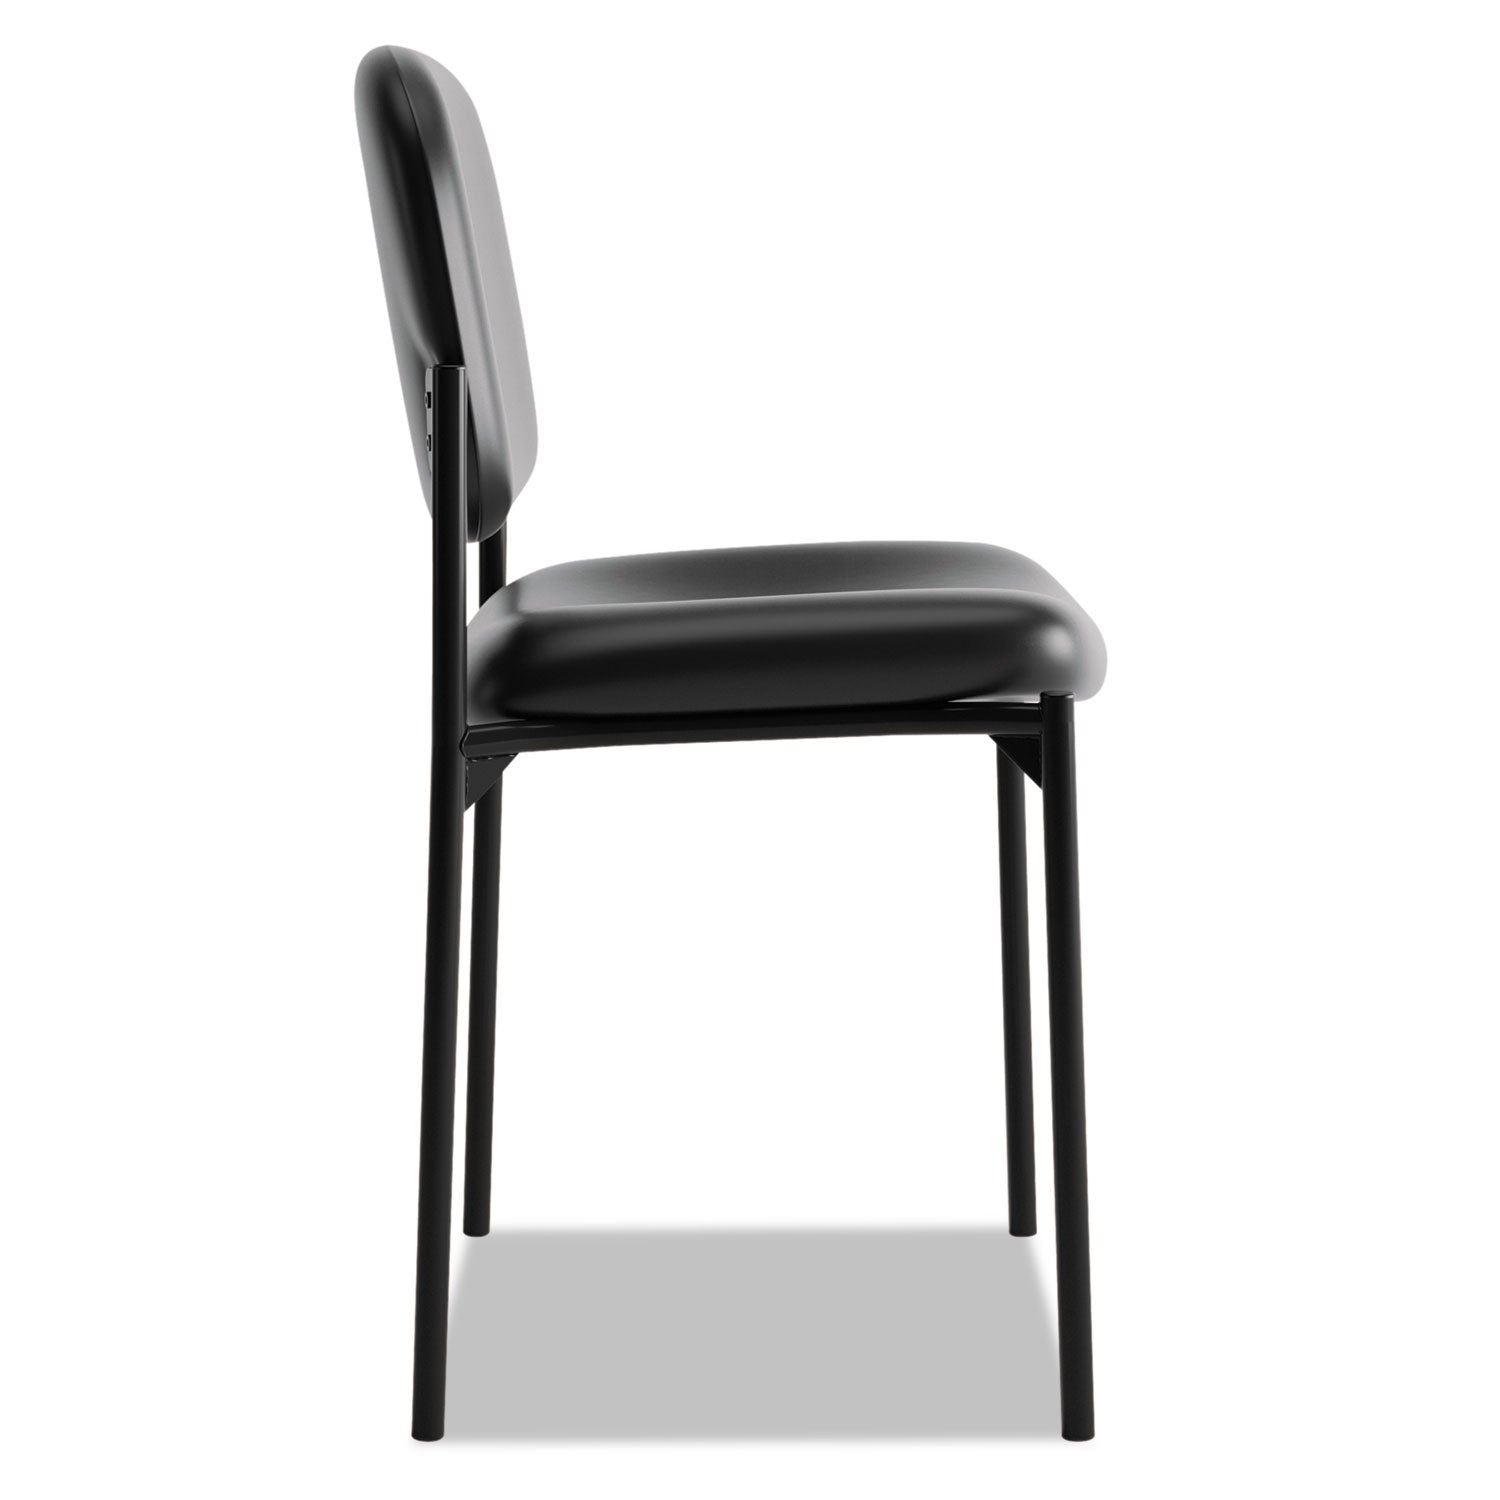 VL606 Stacking Guest Chair without Arms, Bonded Leather Upholstery, 21.25" x 21" x 32.75", Black Seat, Black Back, Black Base - 